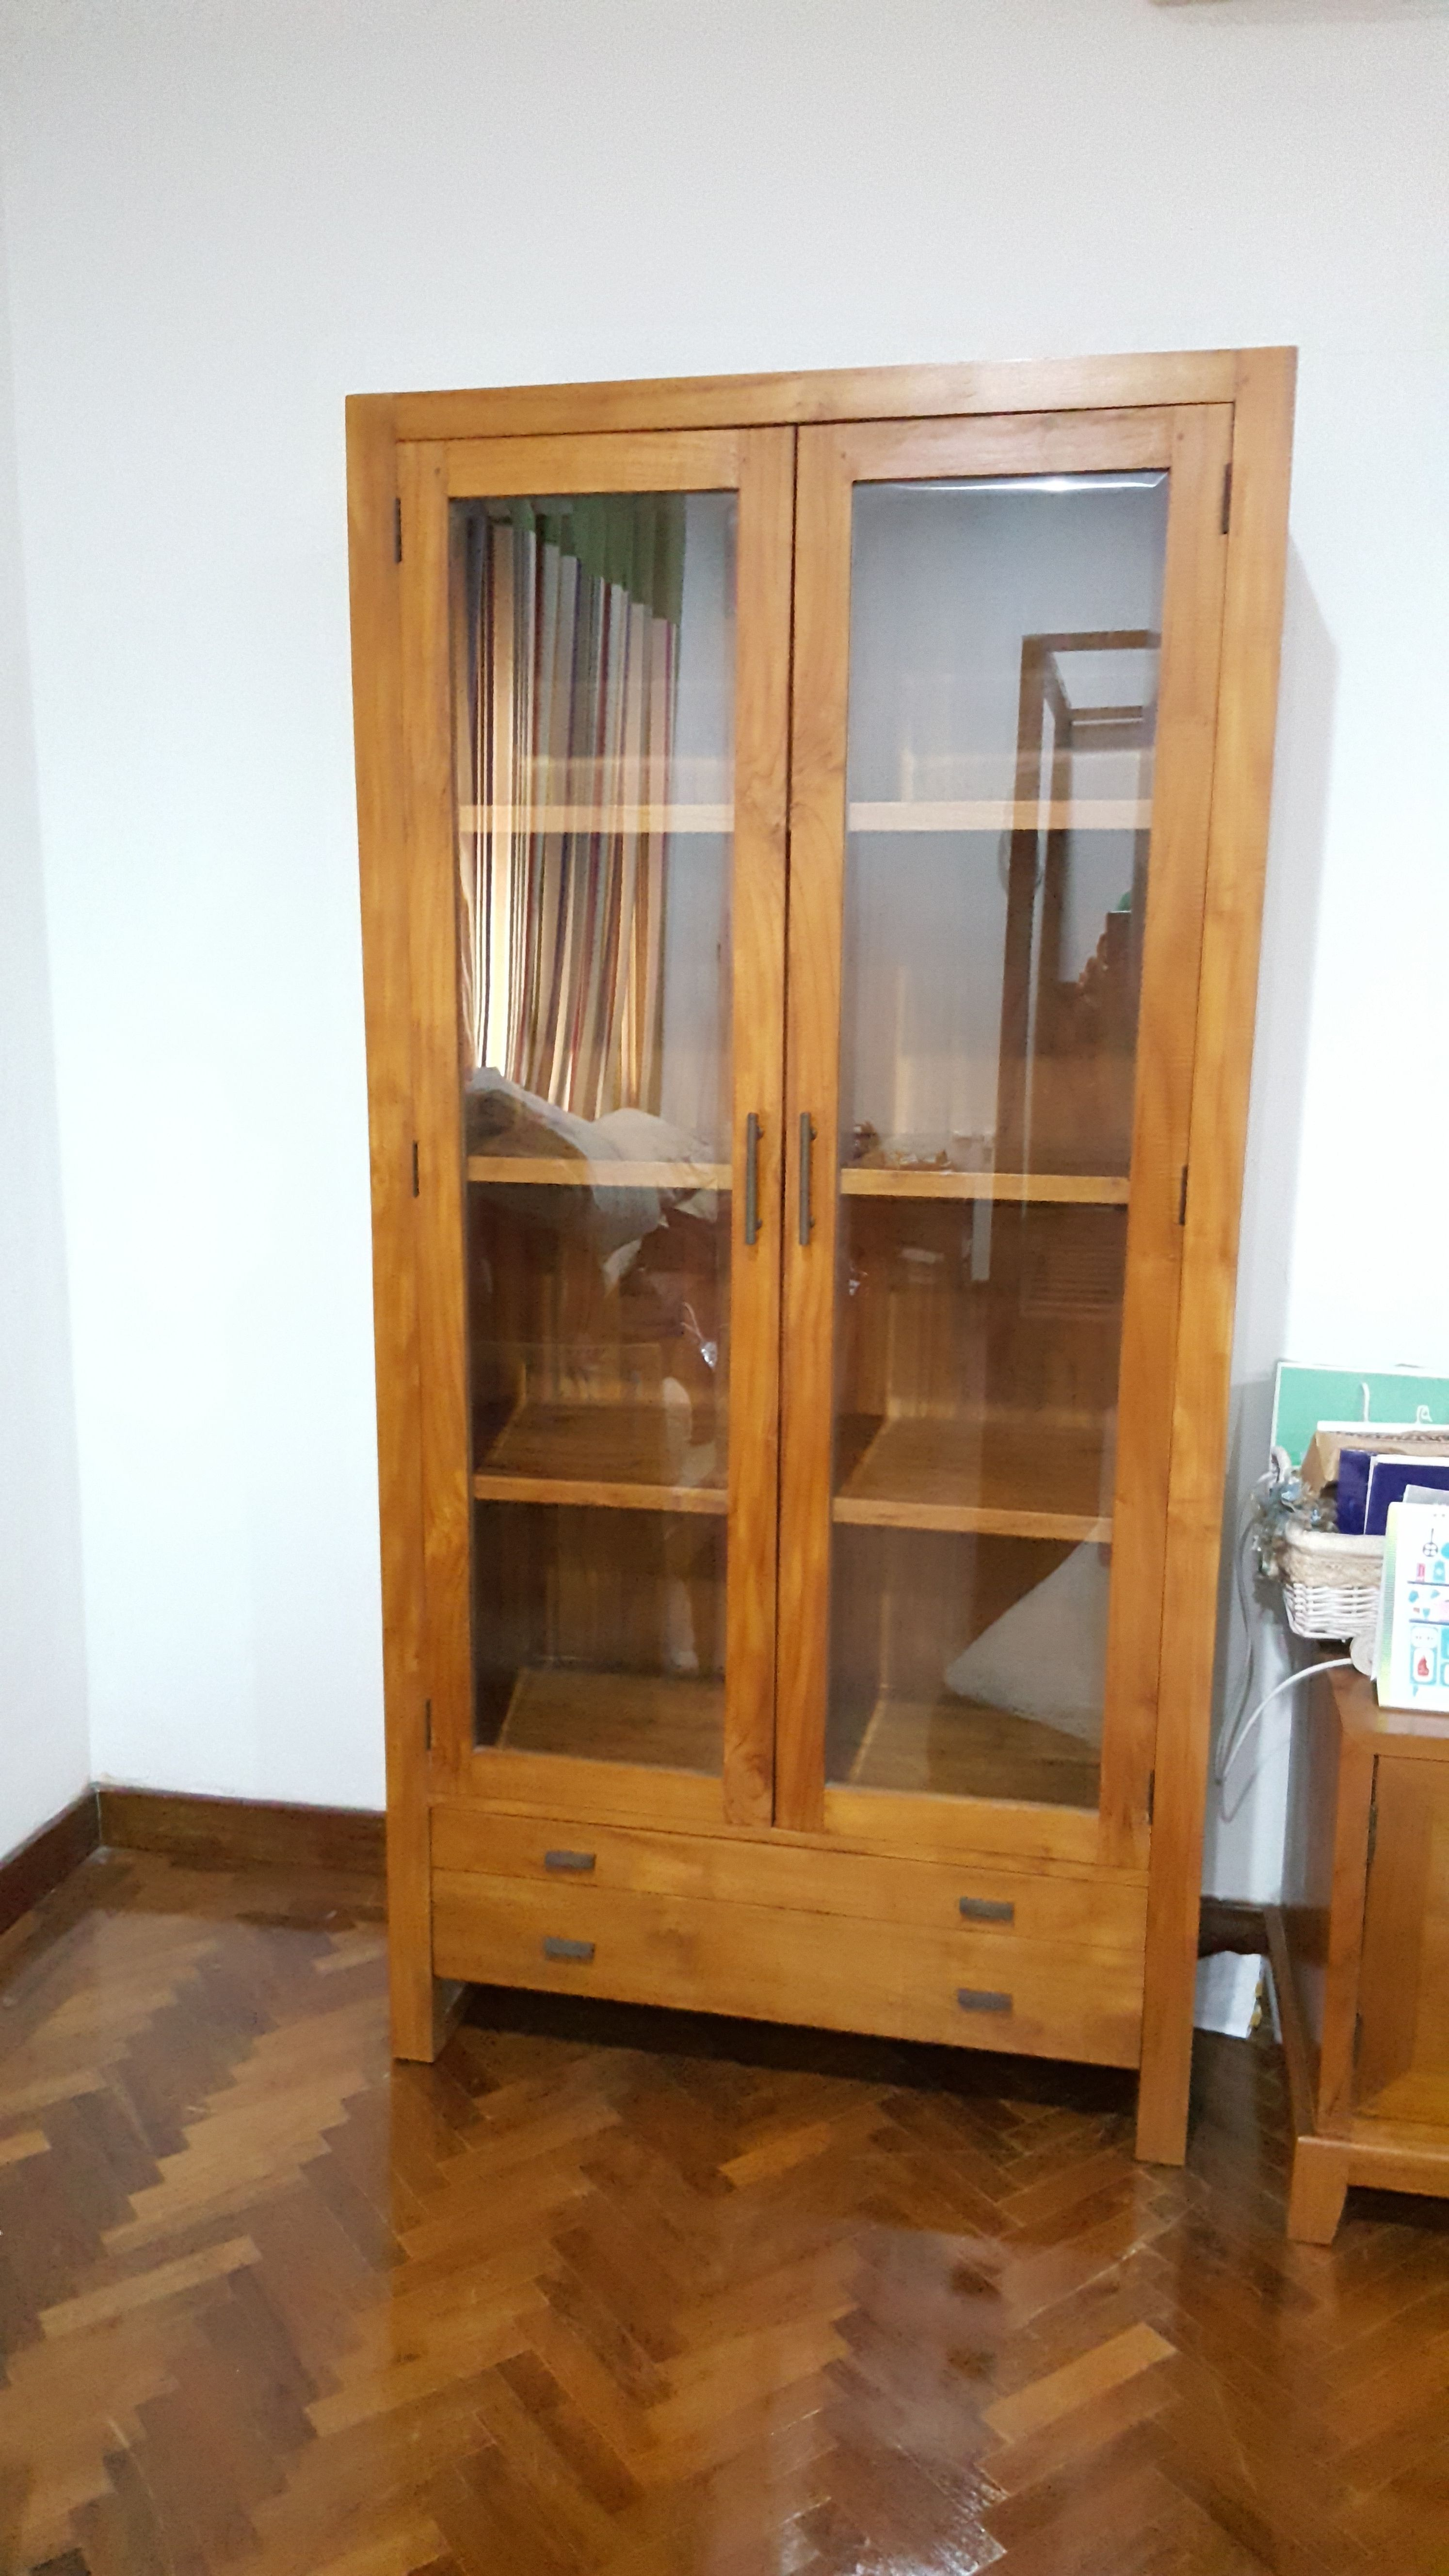 This Two Unit Teak Wood Display Cabinet With Glass Doors In The intended for sizing 2988 X 5312